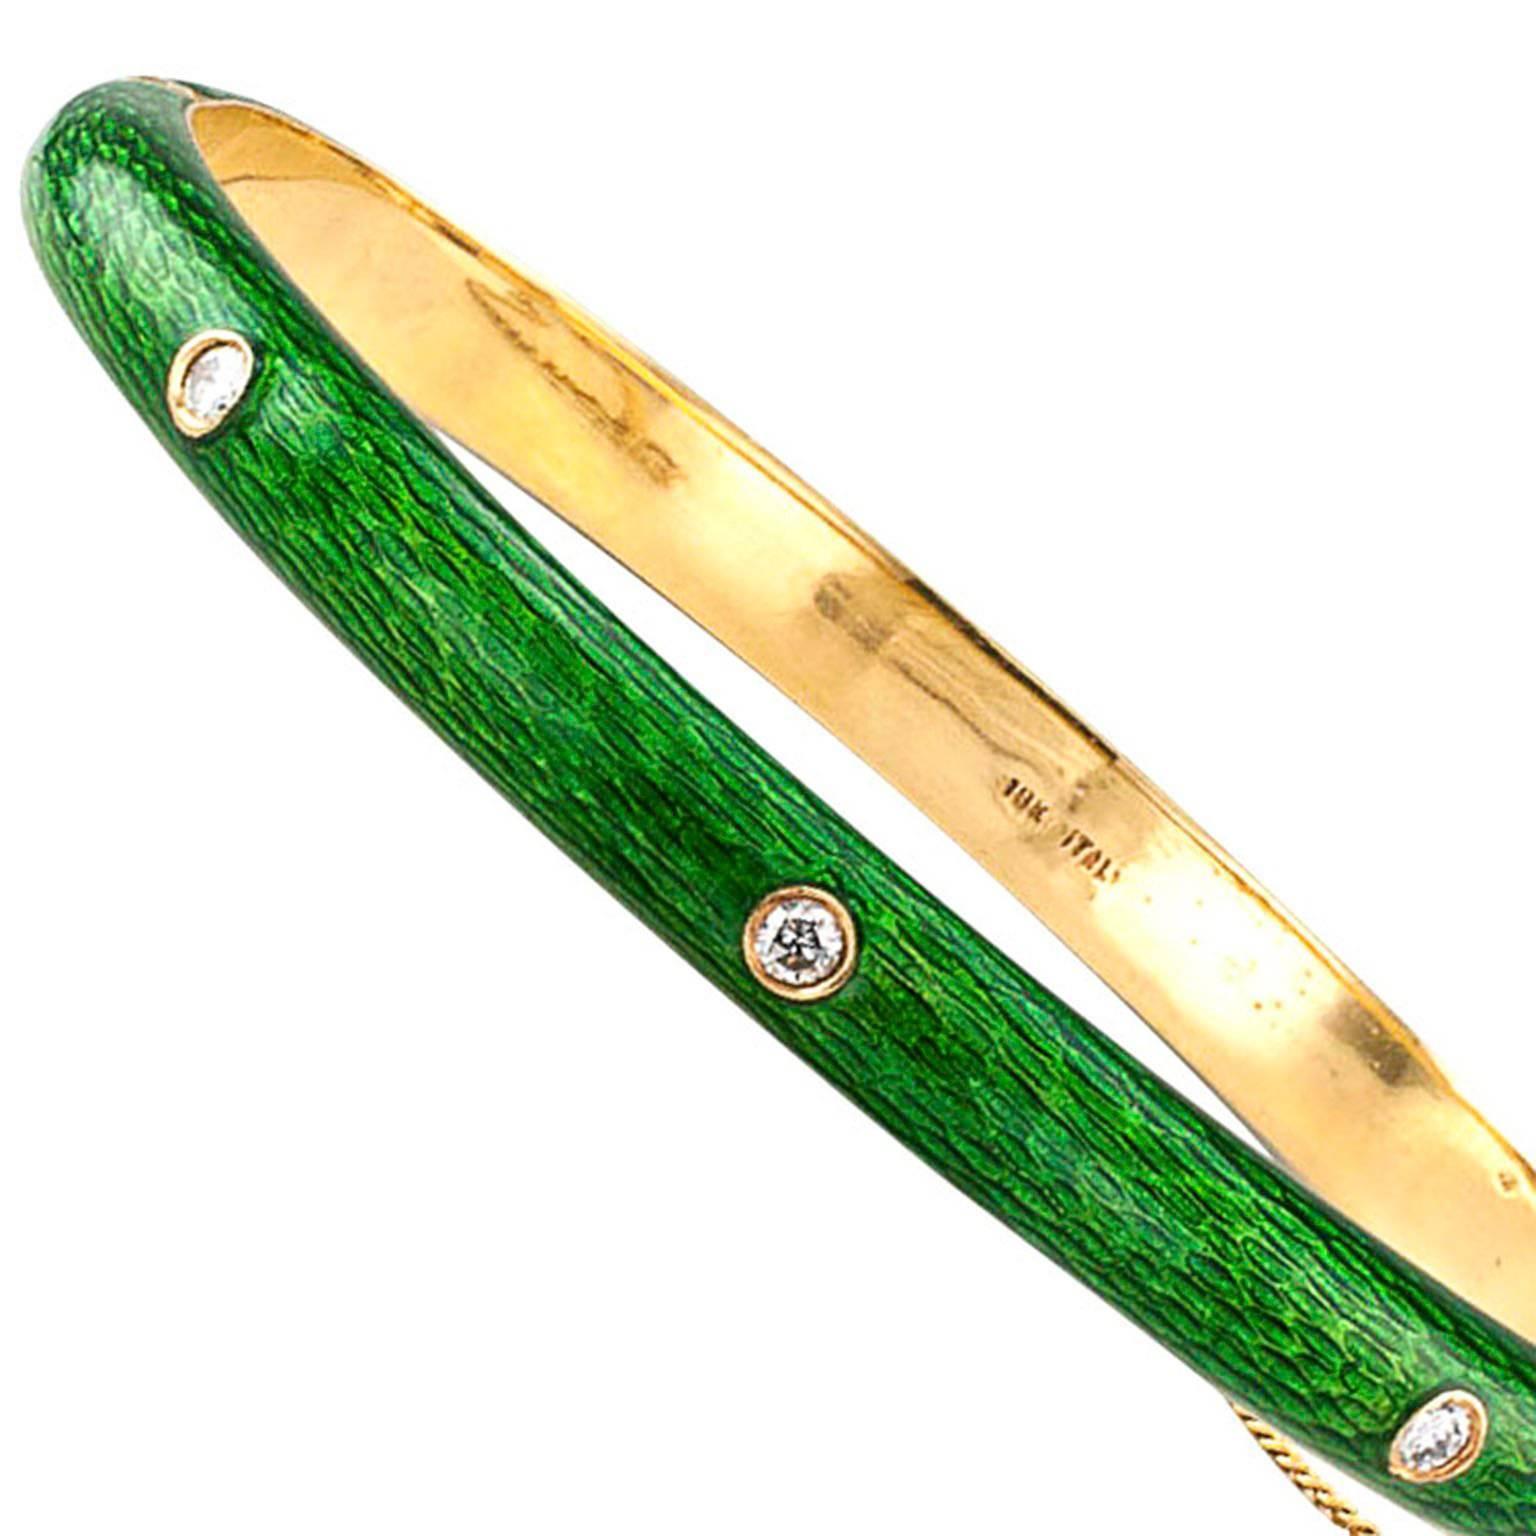 1980's Apple-Green Enamel and Diamond Bangle

Unexpected color... vibrant apple green!  The simple champleve enamel bracelet packs a wonderful punchy look, the top half studded with three bezel-set round brilliant-cut diamonds to lend a starry